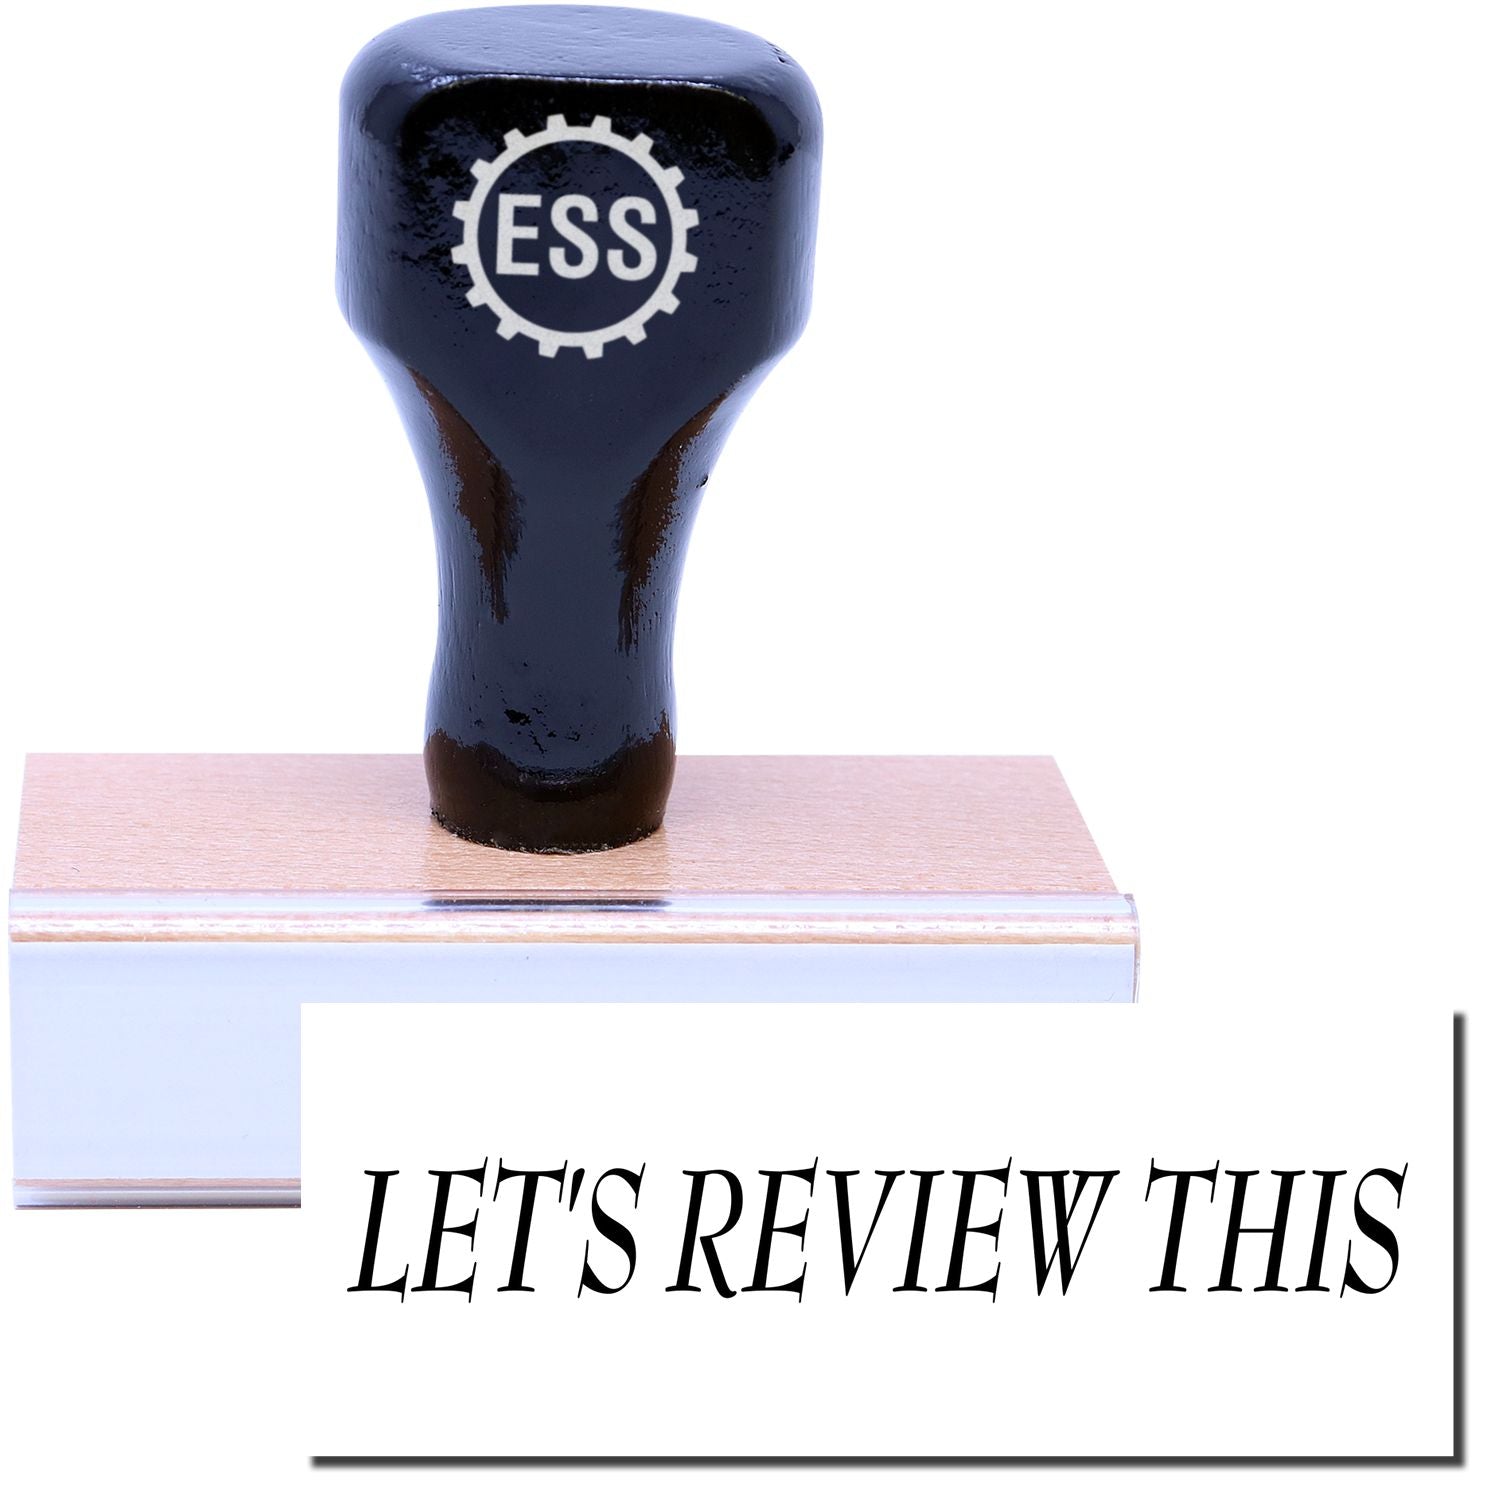 A stock office rubber stamp with a stamped image showing how the text "LET'S REVIEW THIS" is displayed after stamping.